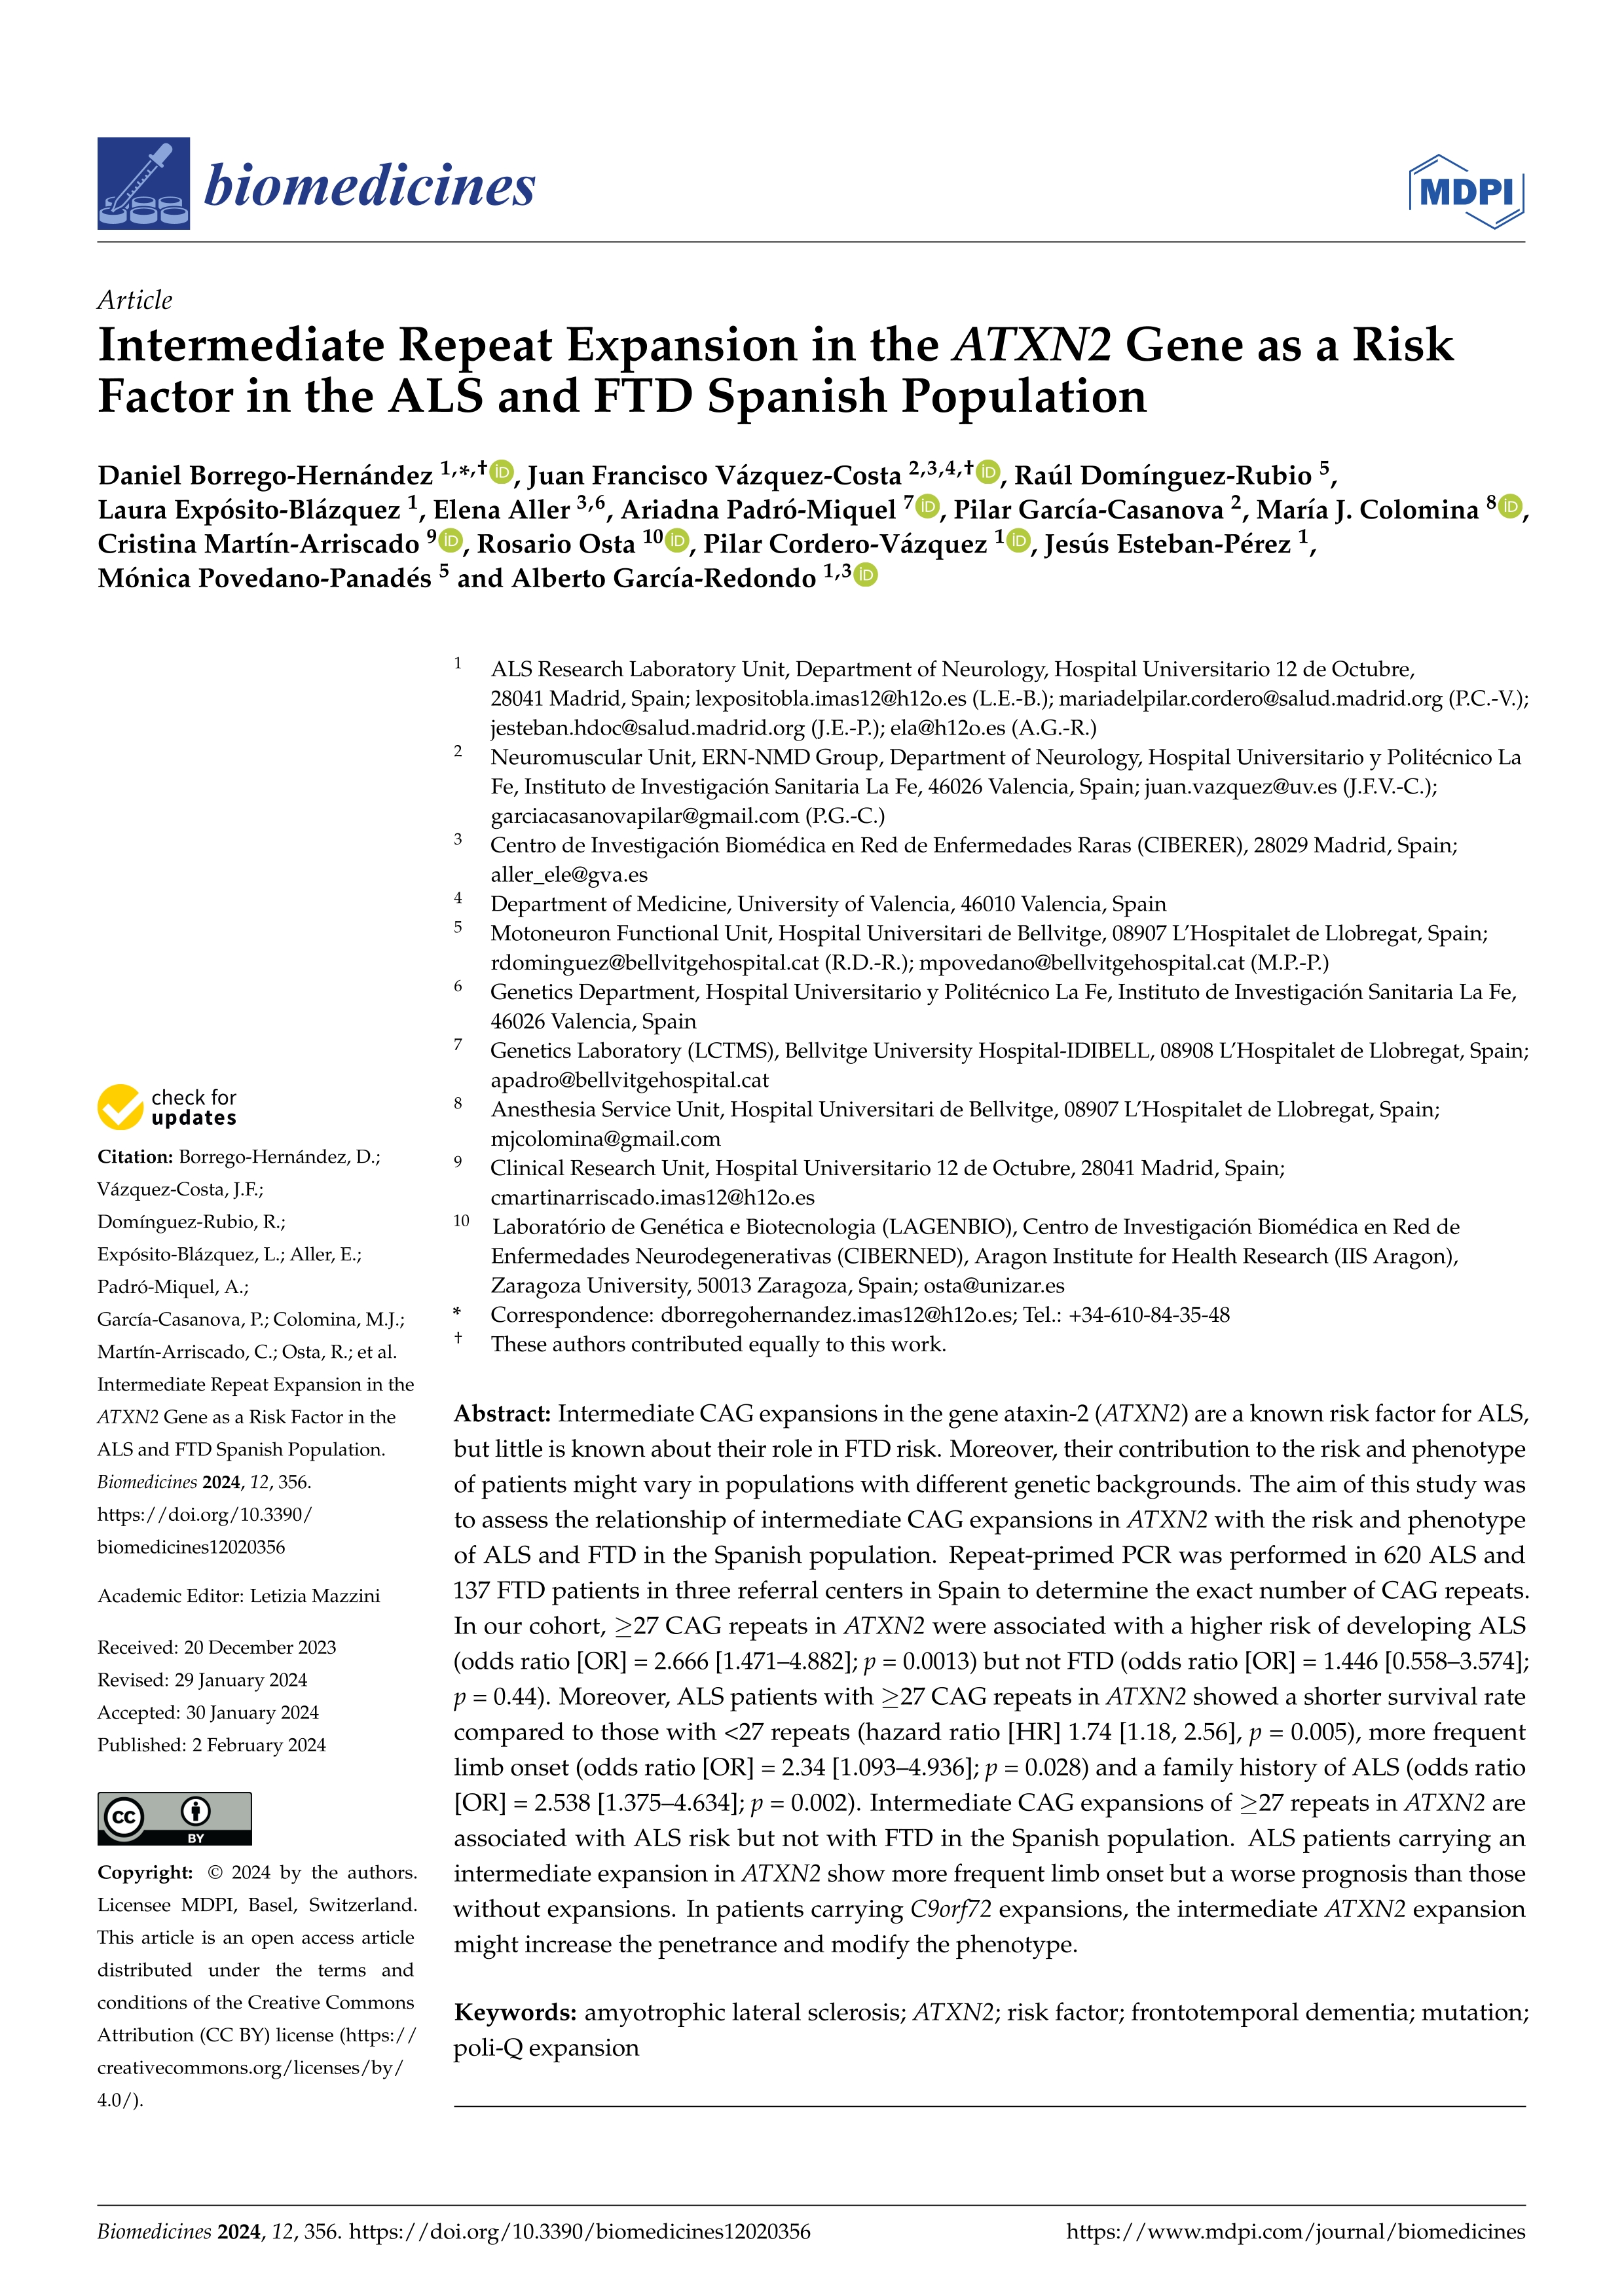 Intermediate Repeat Expansion in the ATXN2 Gene as a Risk Factor in the ALS and FTD Spanish Population